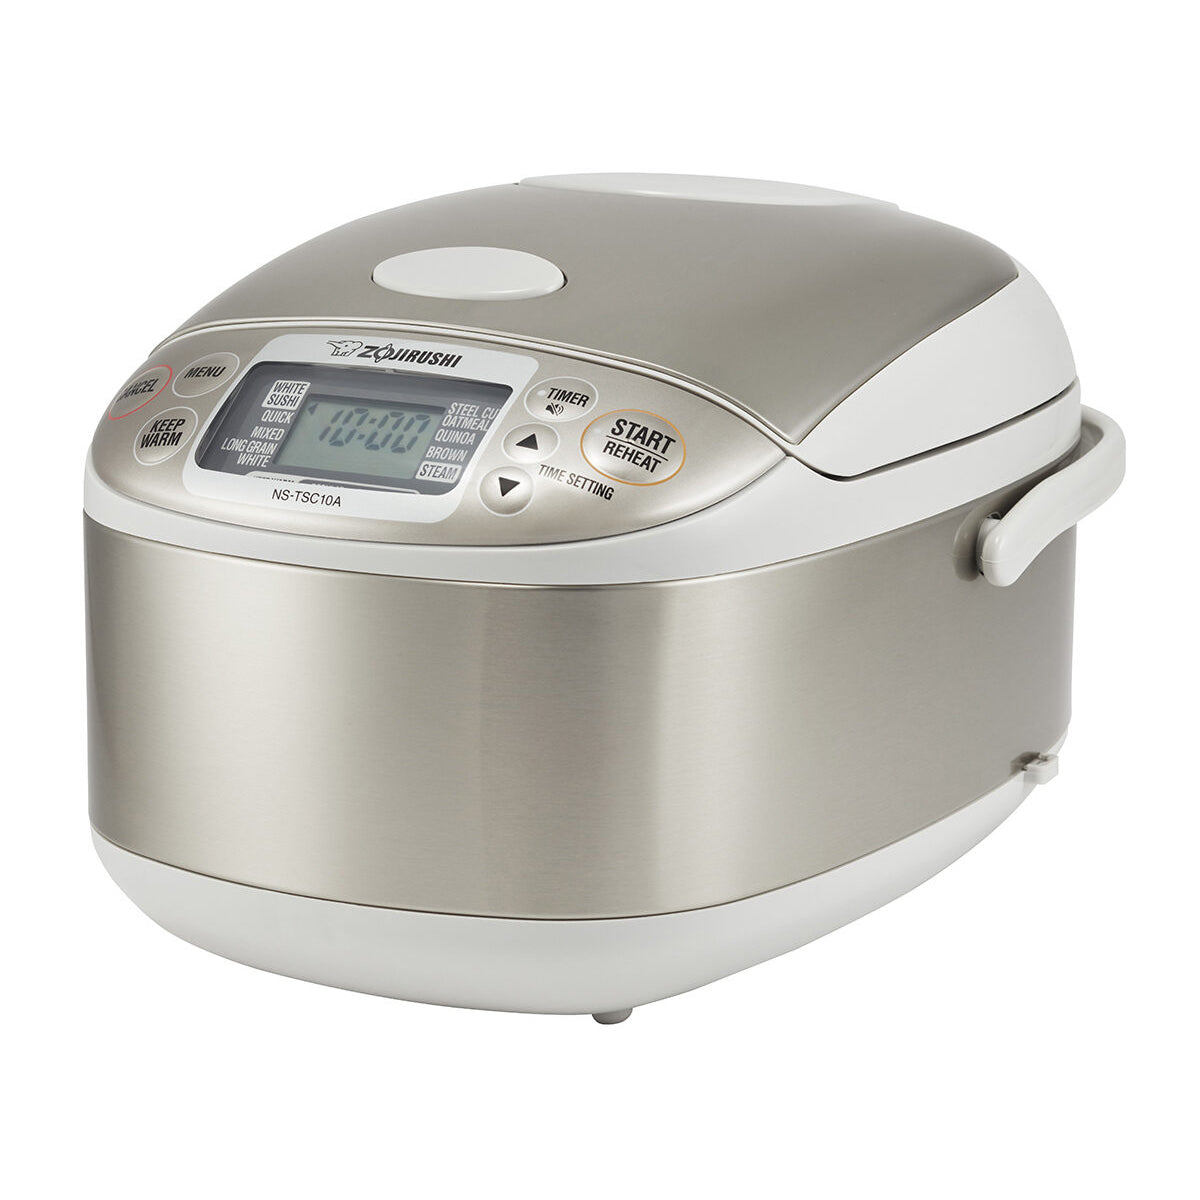 Zojirushi Rice Cooker Measuring Cup - Clear